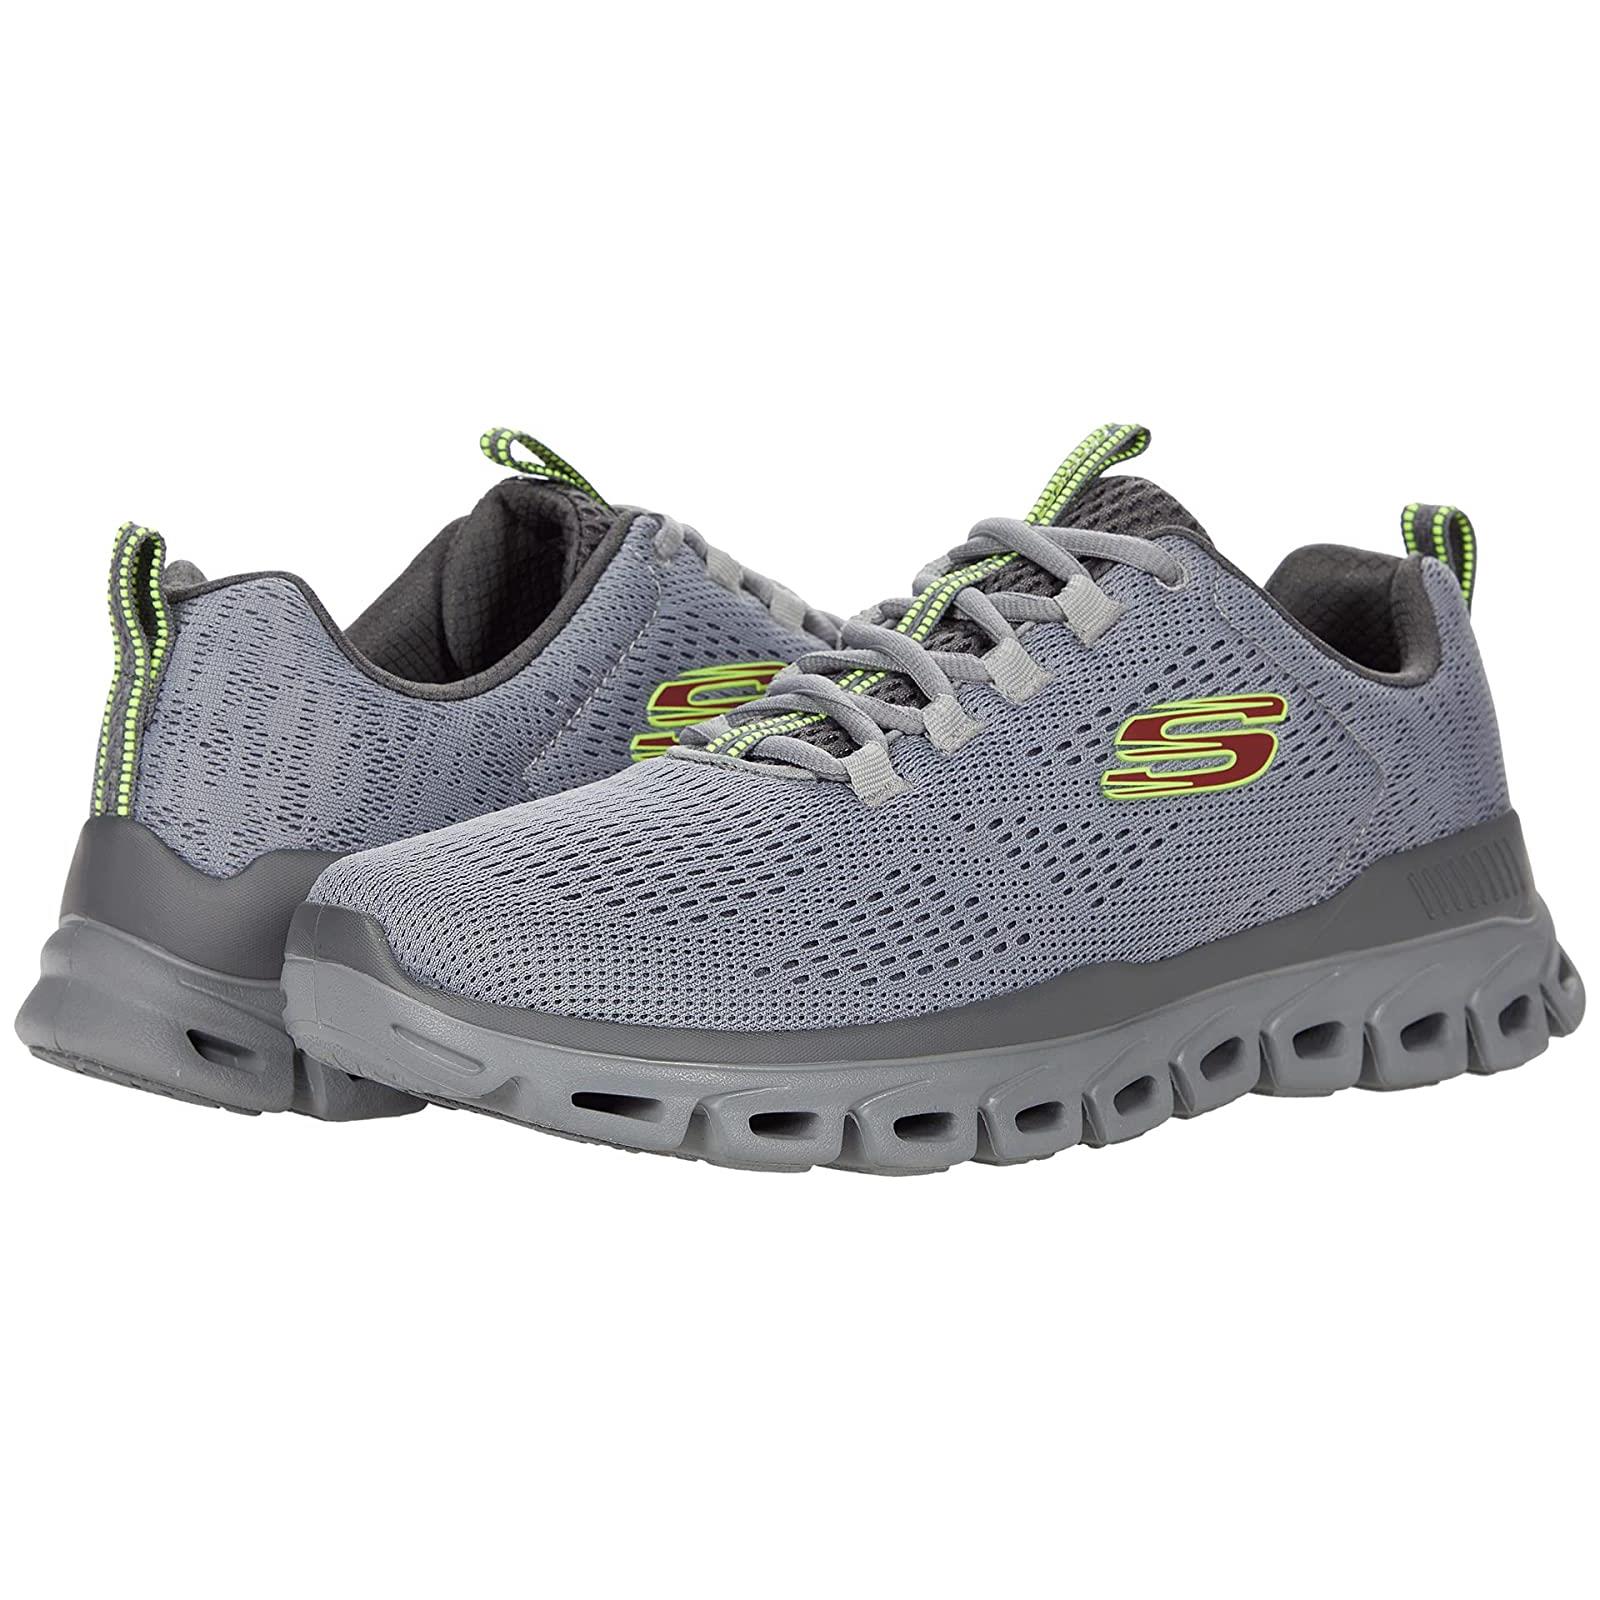 Man`s Sneakers Athletic Shoes Skechers Glide Step Fasten Up Gray